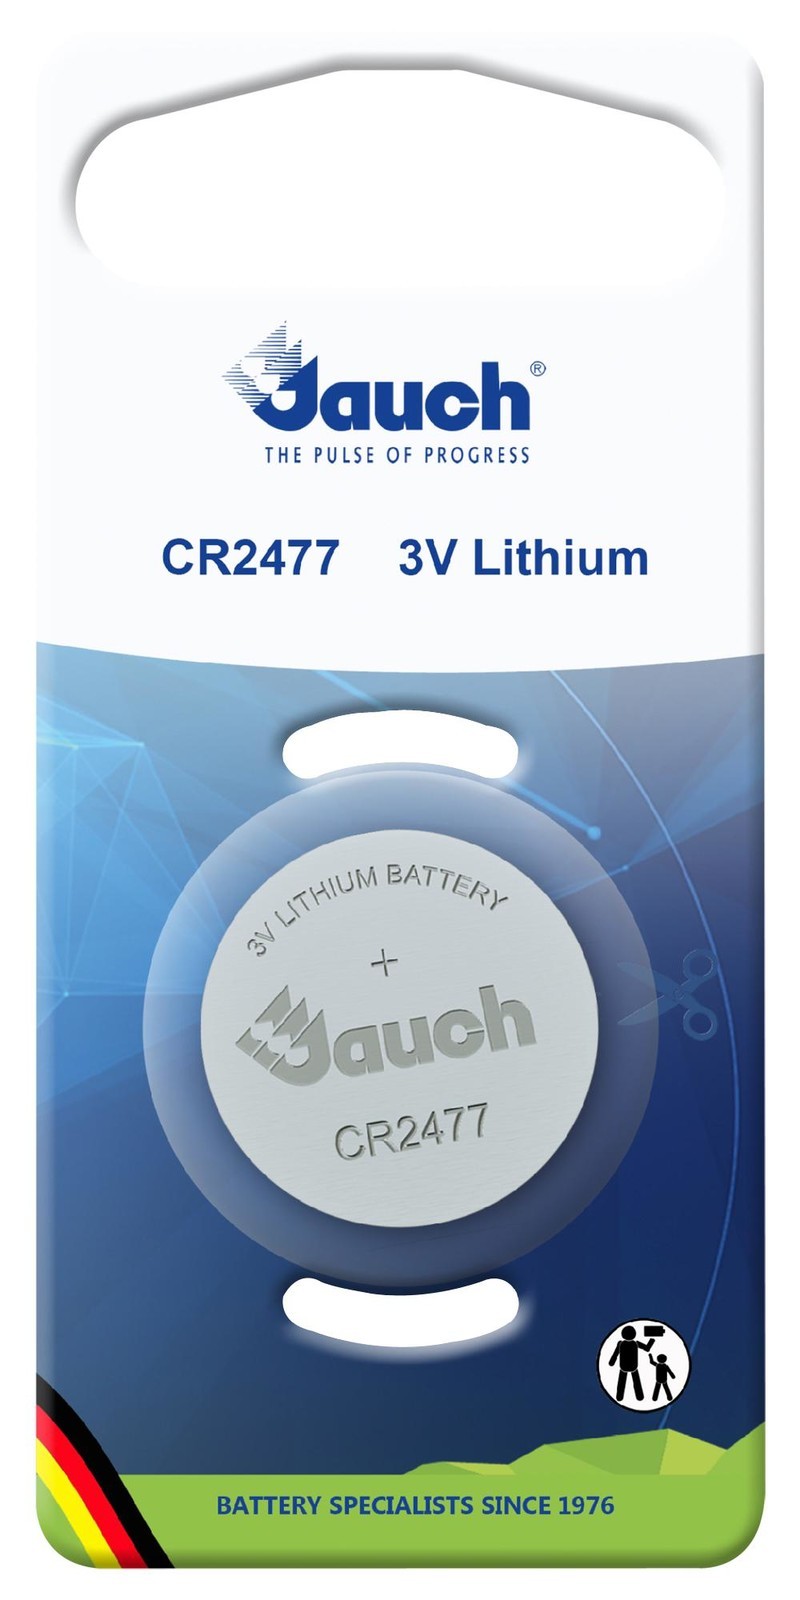 Jauch Cr 2477 Battery, Non Rechargeable, 1Ah, 3V